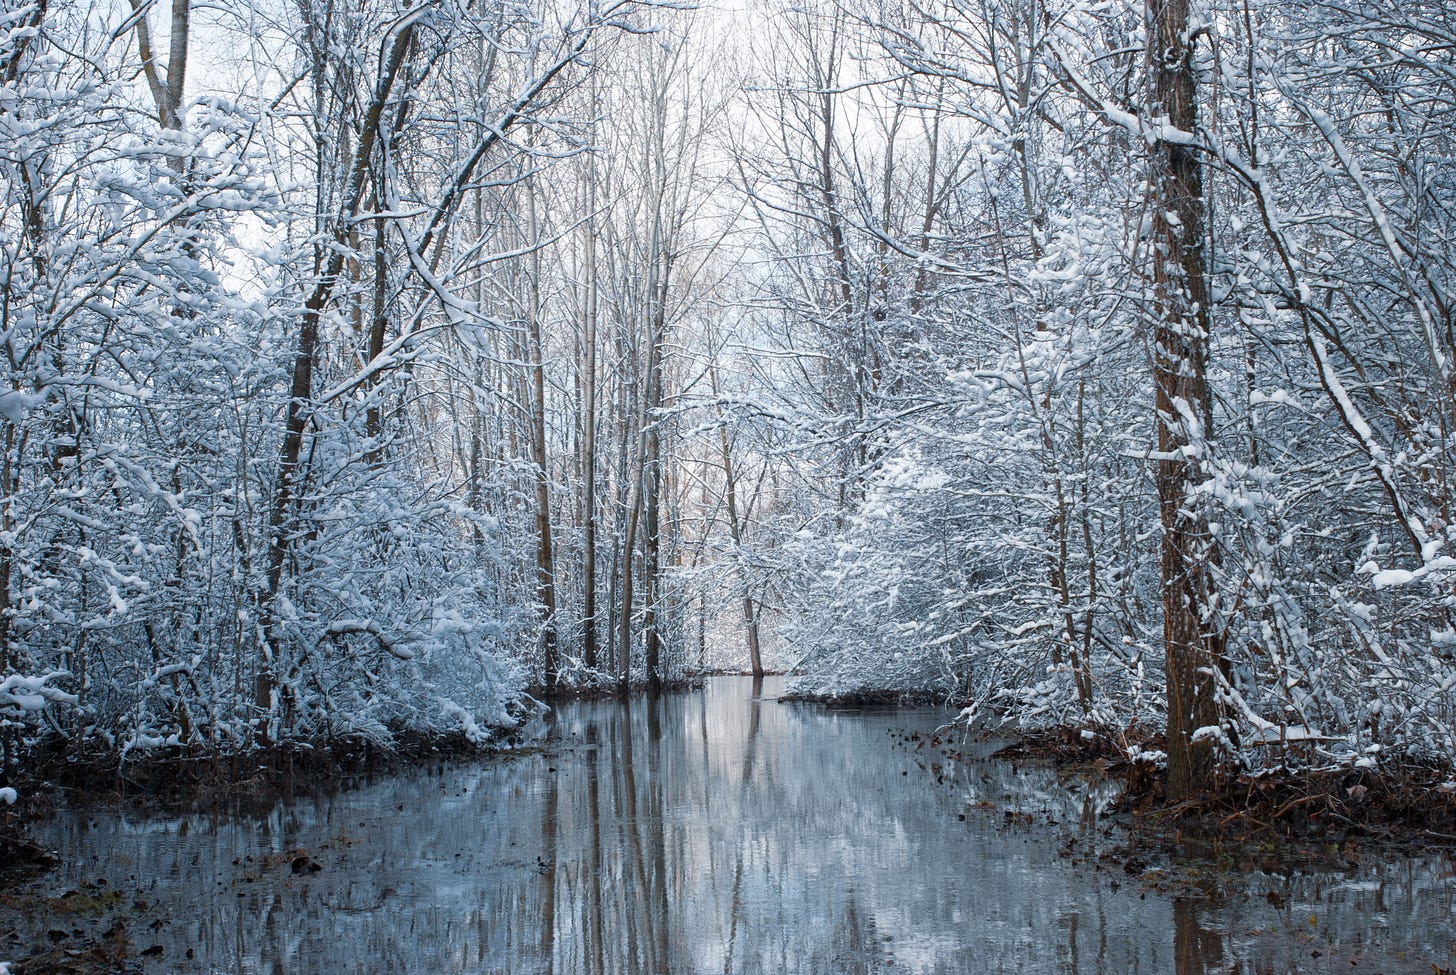 A beautiful, picturesque photo of what looks like a river and snowy trees. The river is actually a flooded path full of sewage.